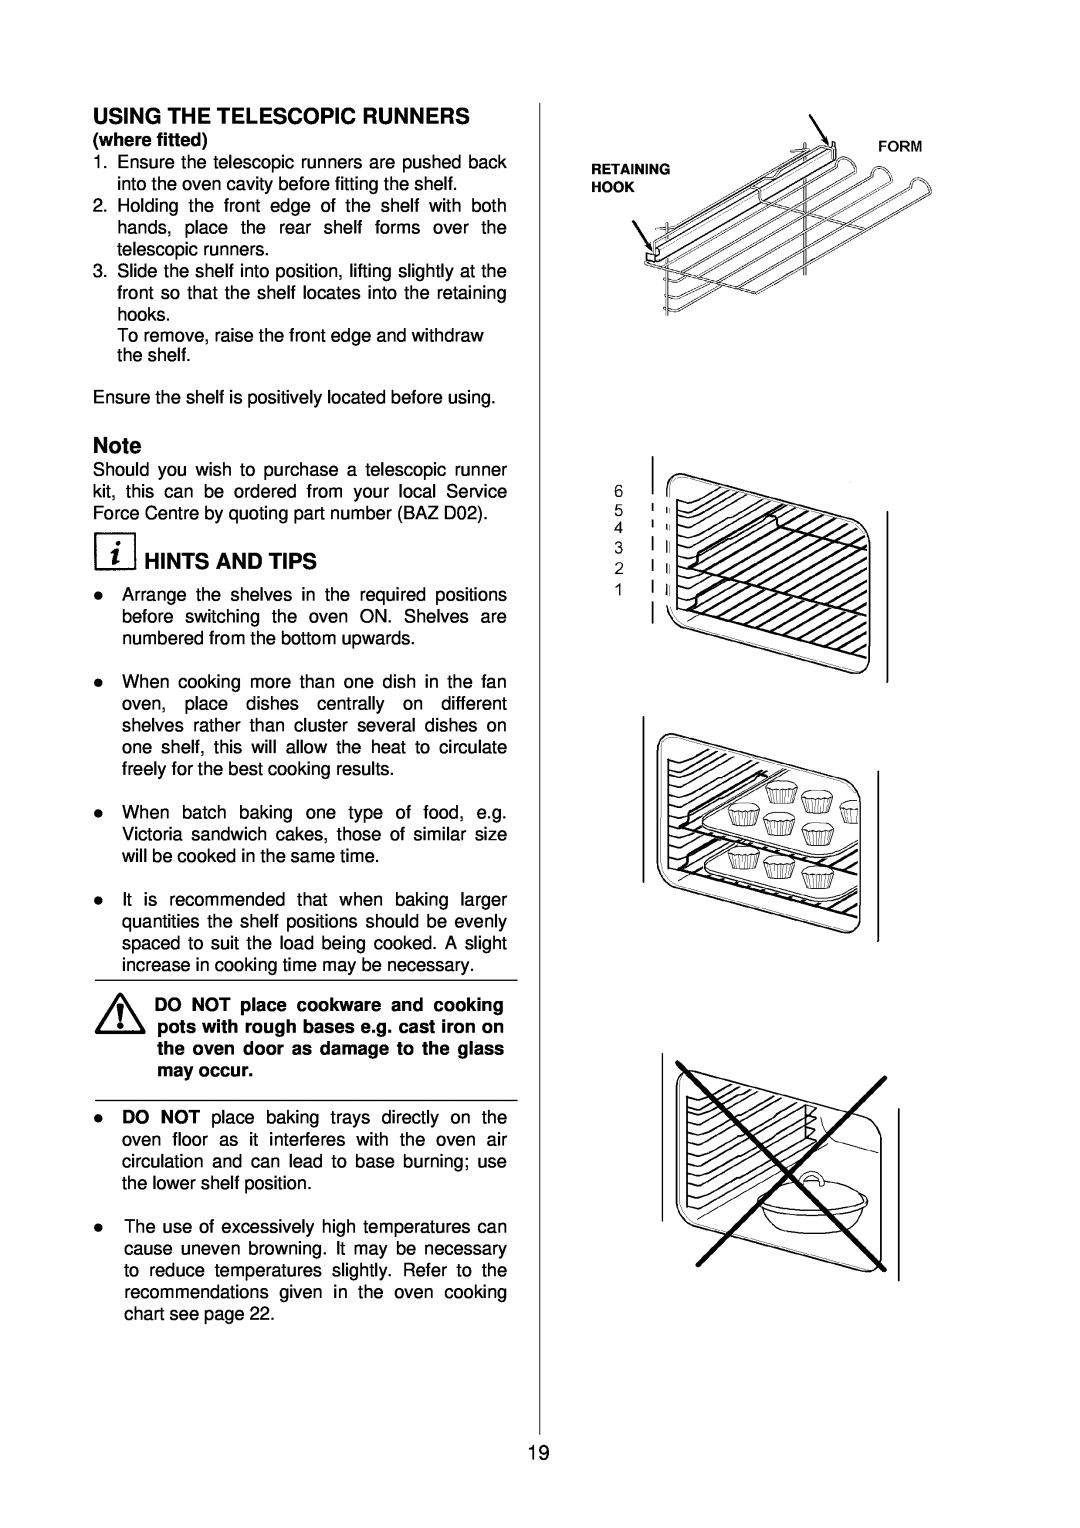 Electrolux D4100-1 operating instructions Using The Telescopic Runners, Hints And Tips, where fitted 